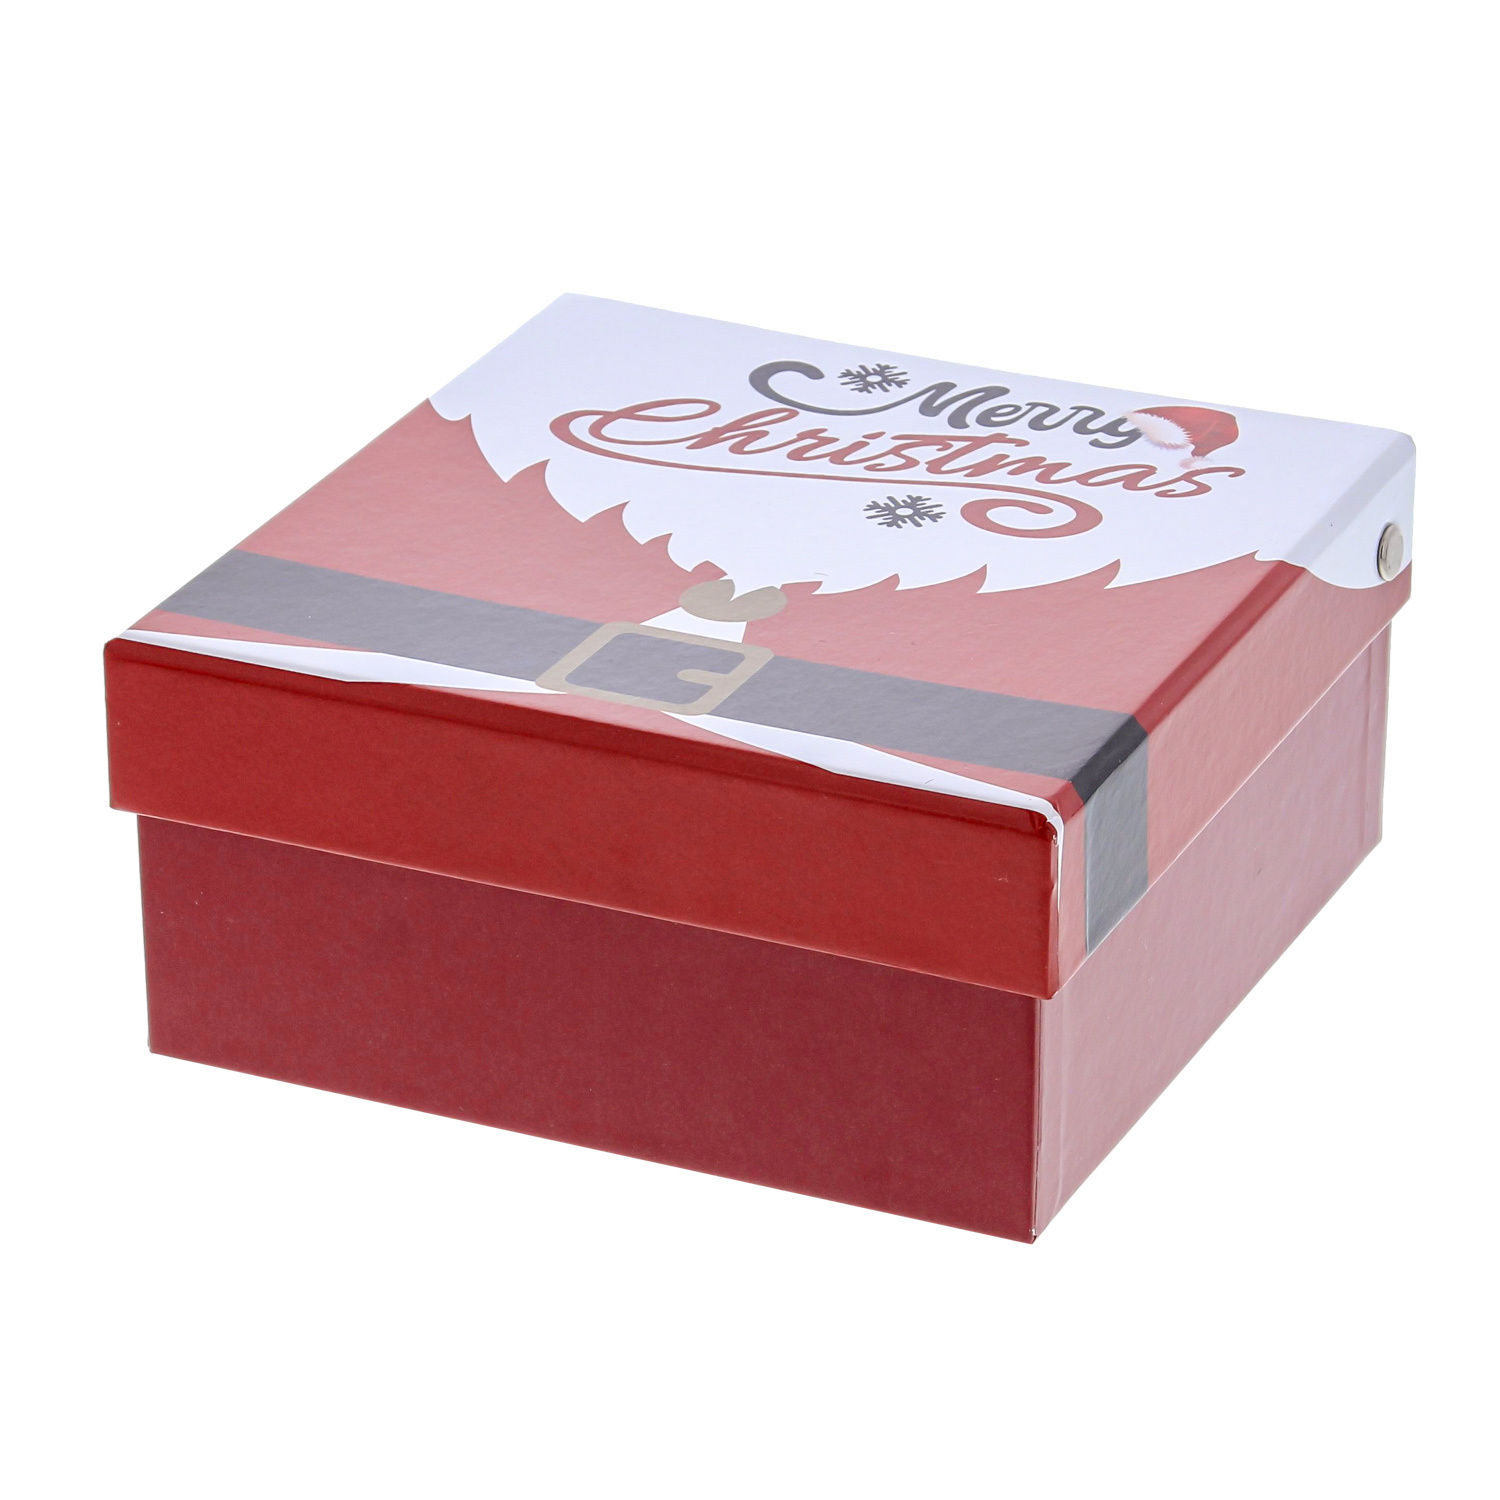 "Santa Belly" Box with lid square large 155*150*72 mm - 10 pieces